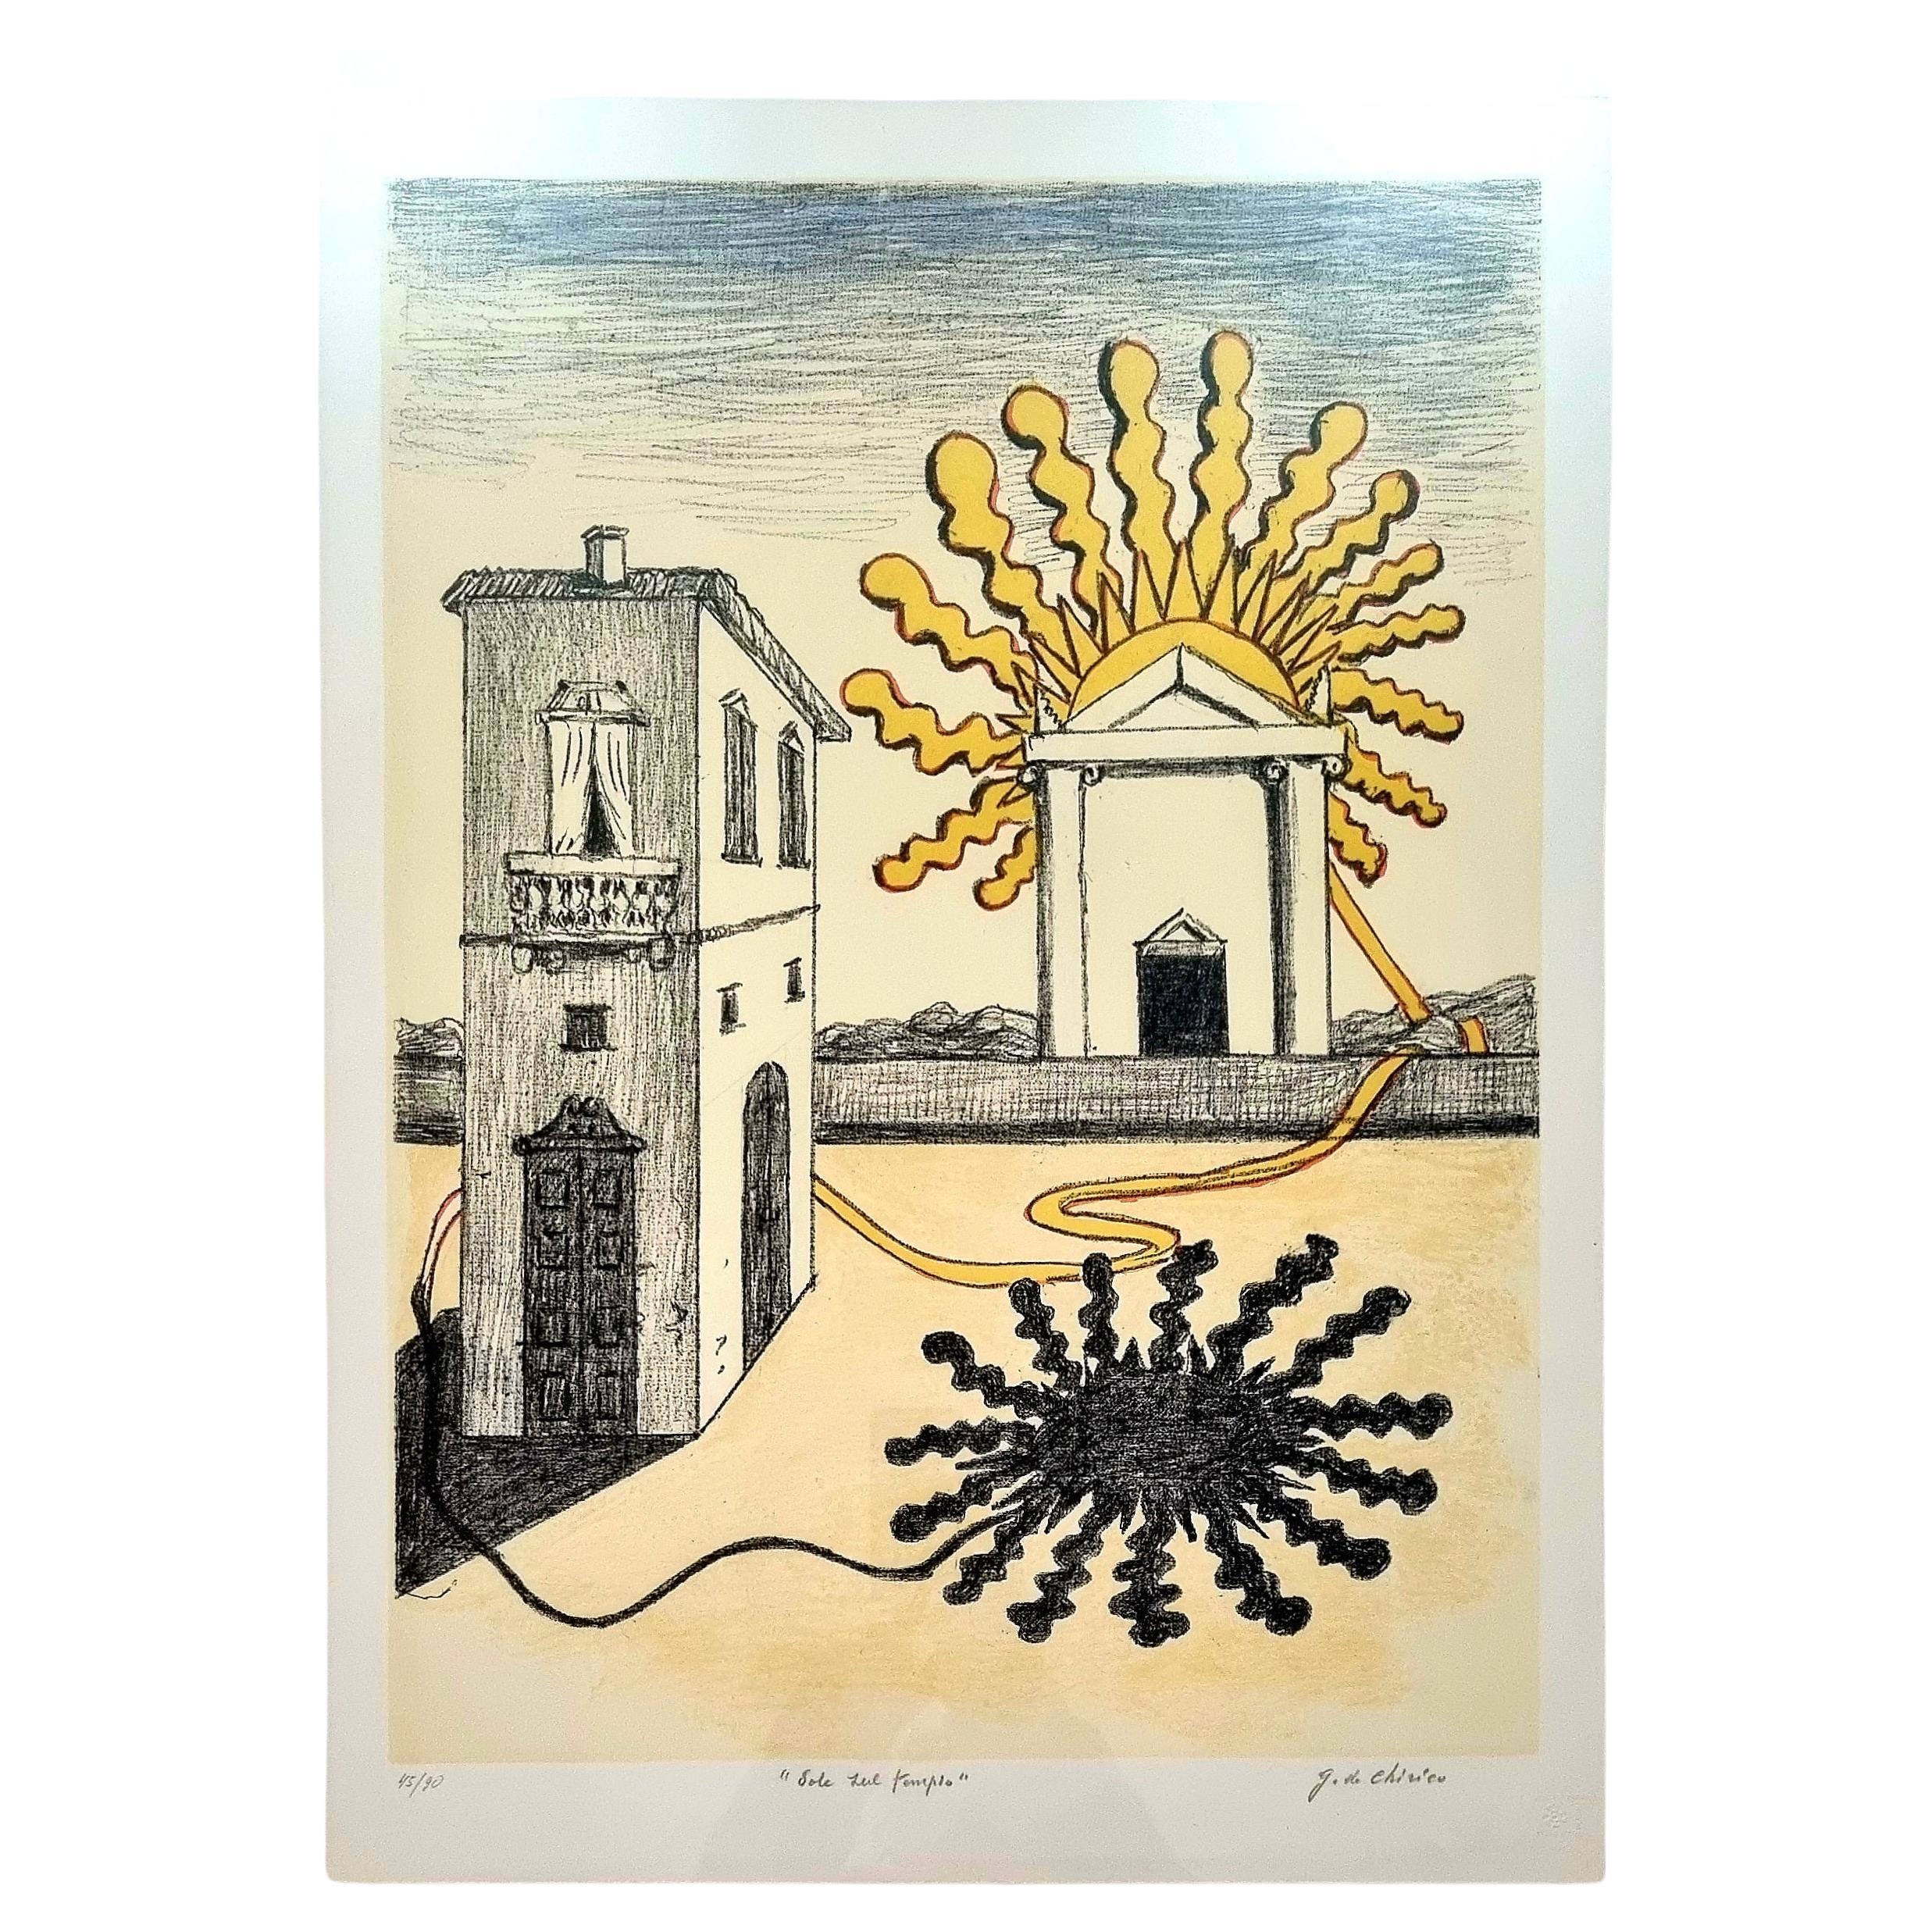 GIORGIO DE CHIRICO - Sun on the Temple 1969 Lithograph signed and numbered